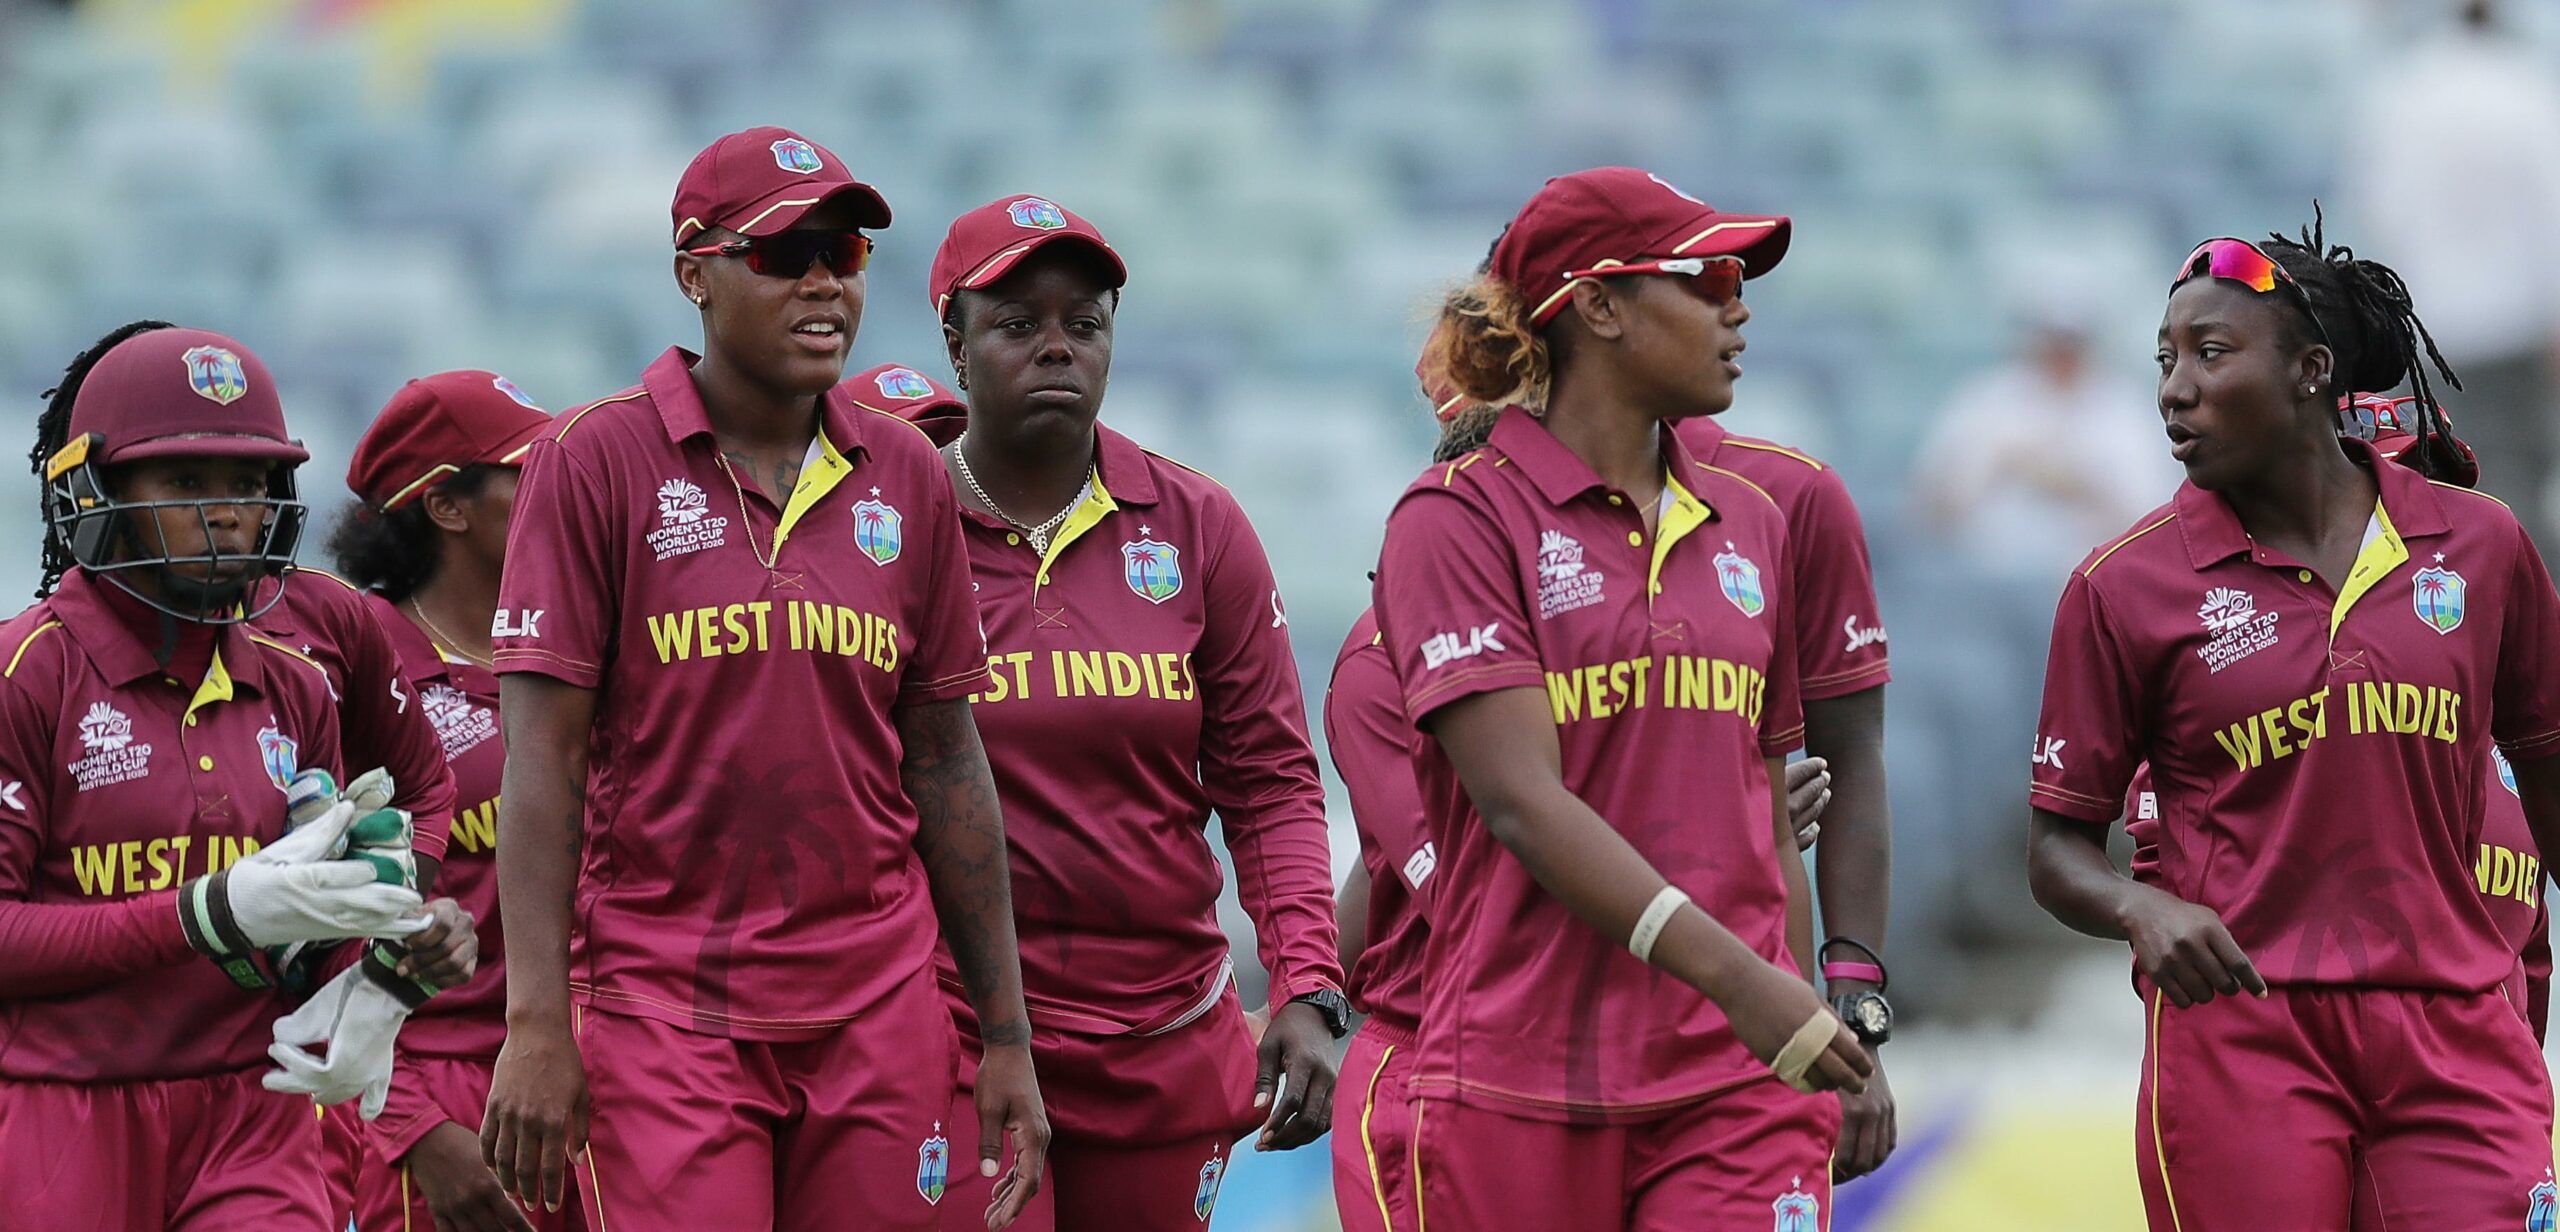 West Indies Women vs. England Women Predictions, Betting Tips & Odds │9 MARCH, 2022